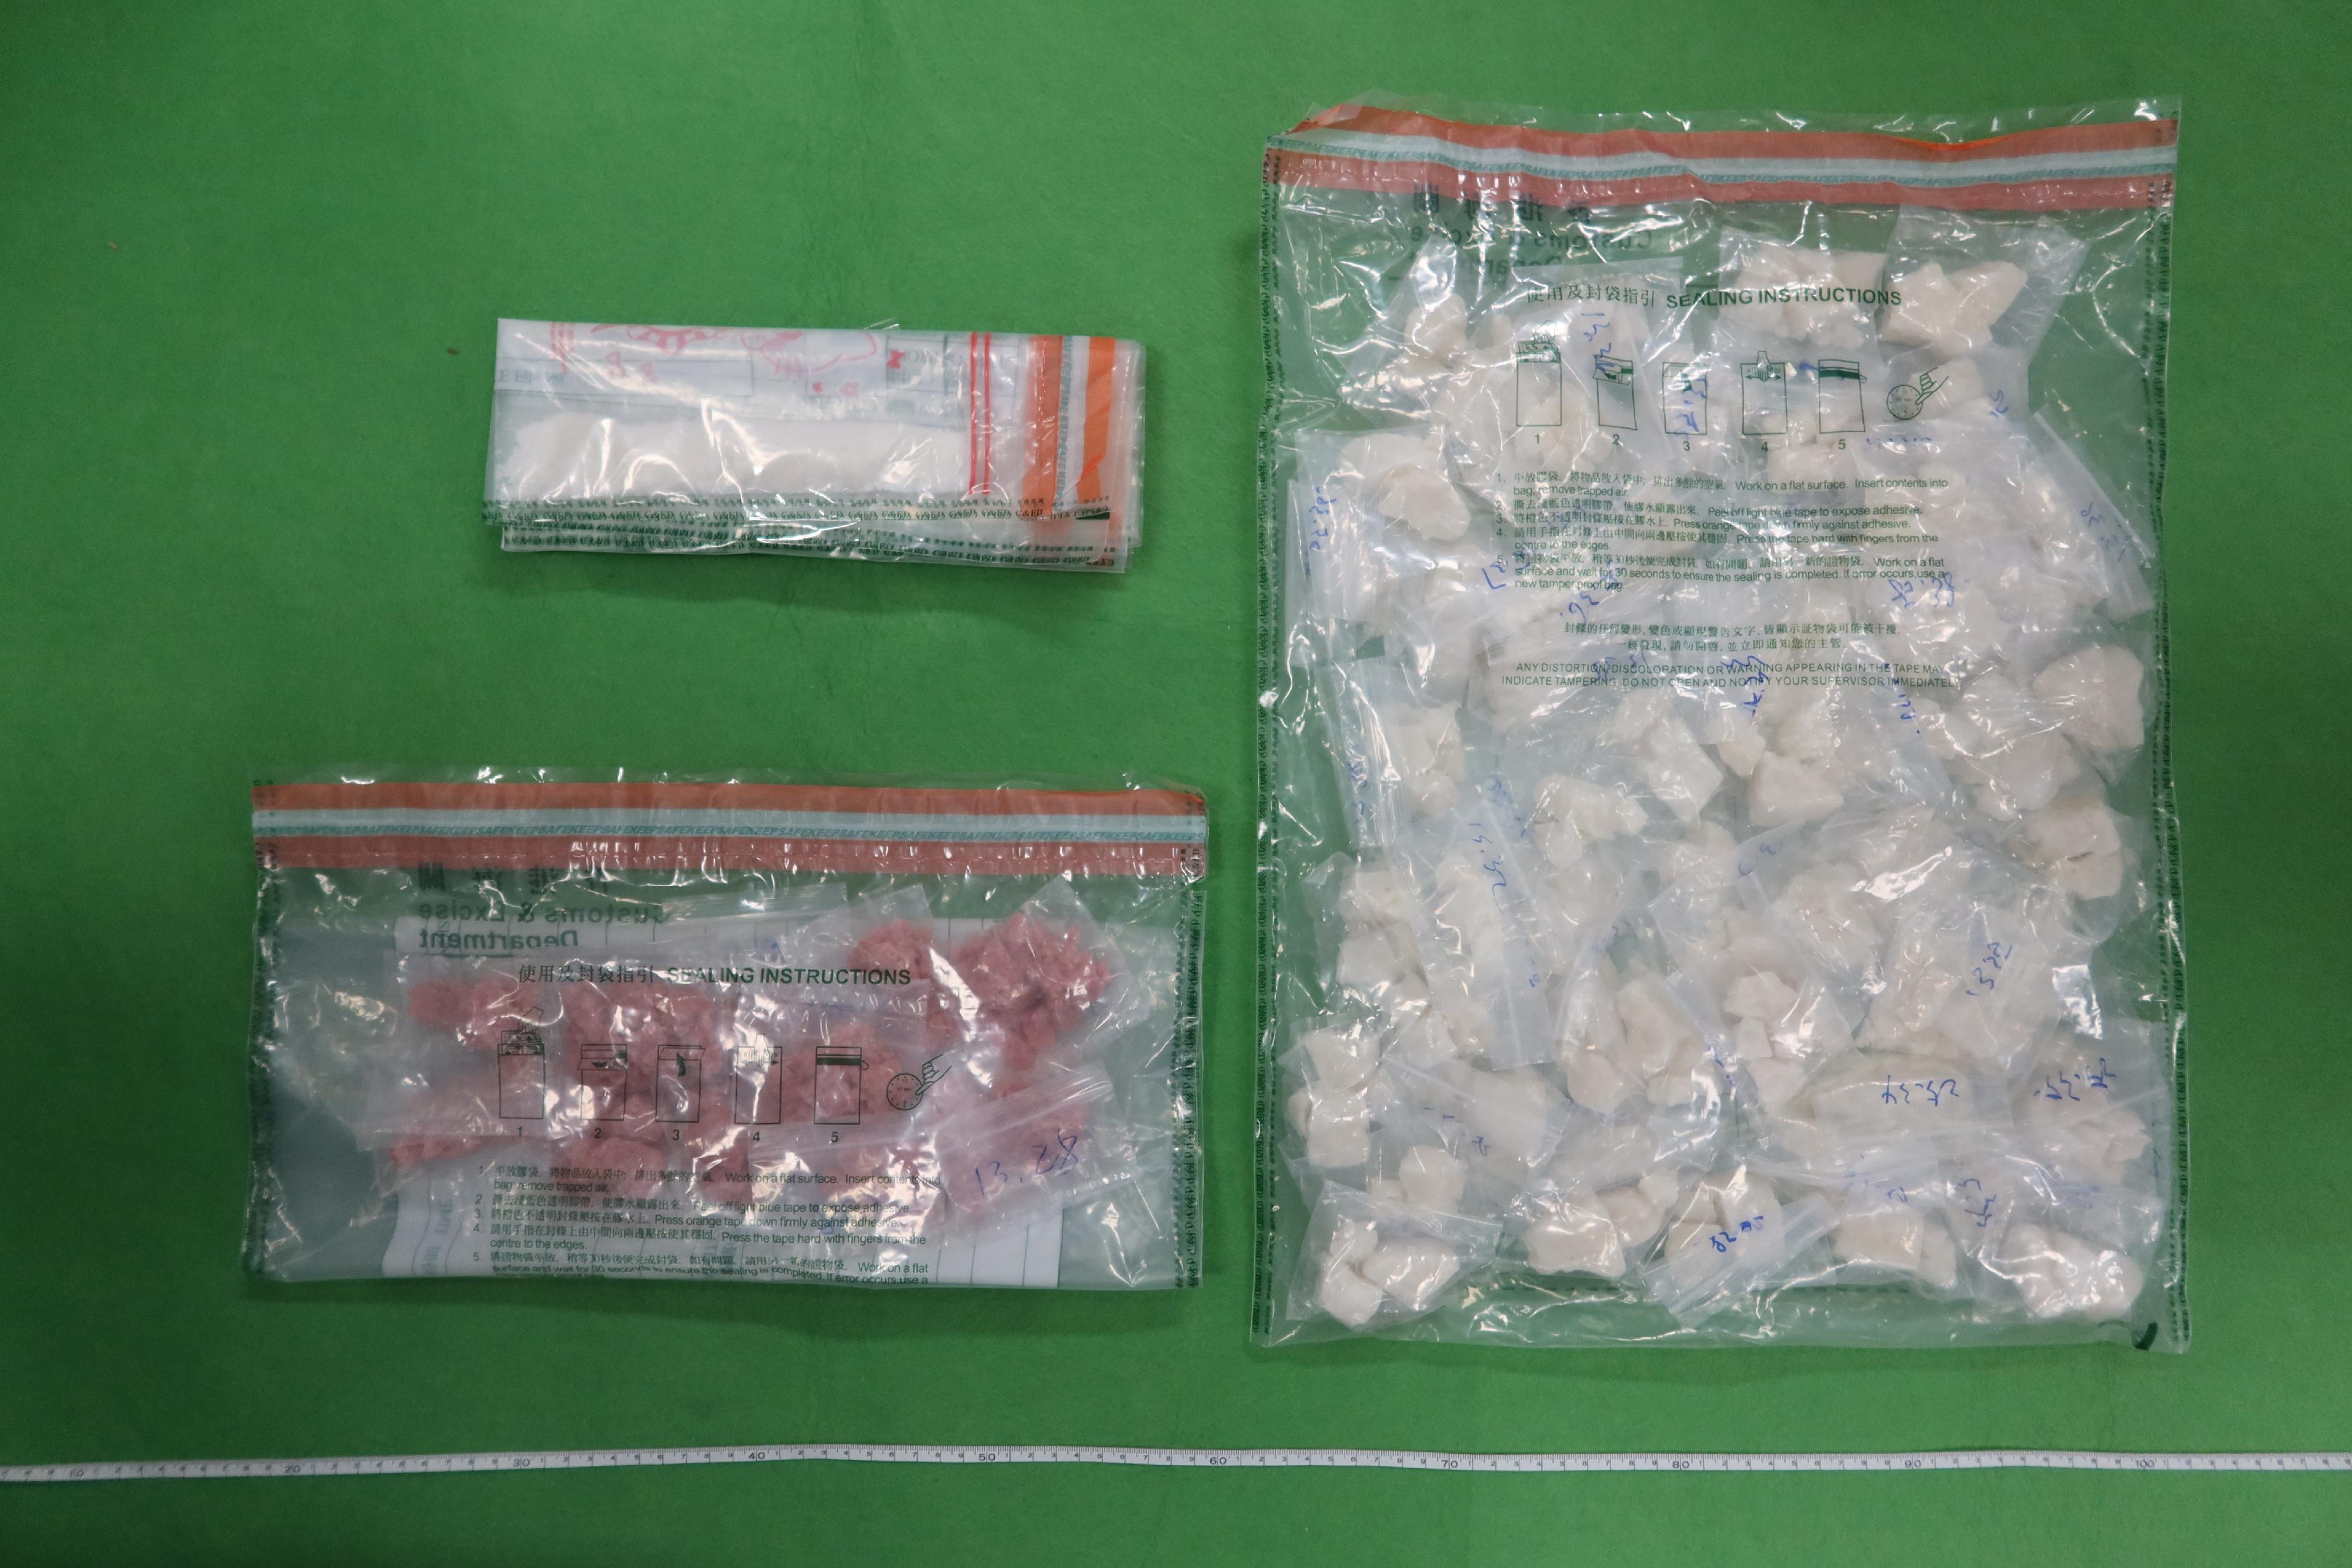 Hong Kong Customs today (April 25) seized about 1.5 kilograms of suspected crack cocaine and about 25 grams of suspected ketamine with a total estimated market value of about $2 million in Cheung Sha Wan. Photo shows the suspected crack cocaine and suspected ketamine seized.